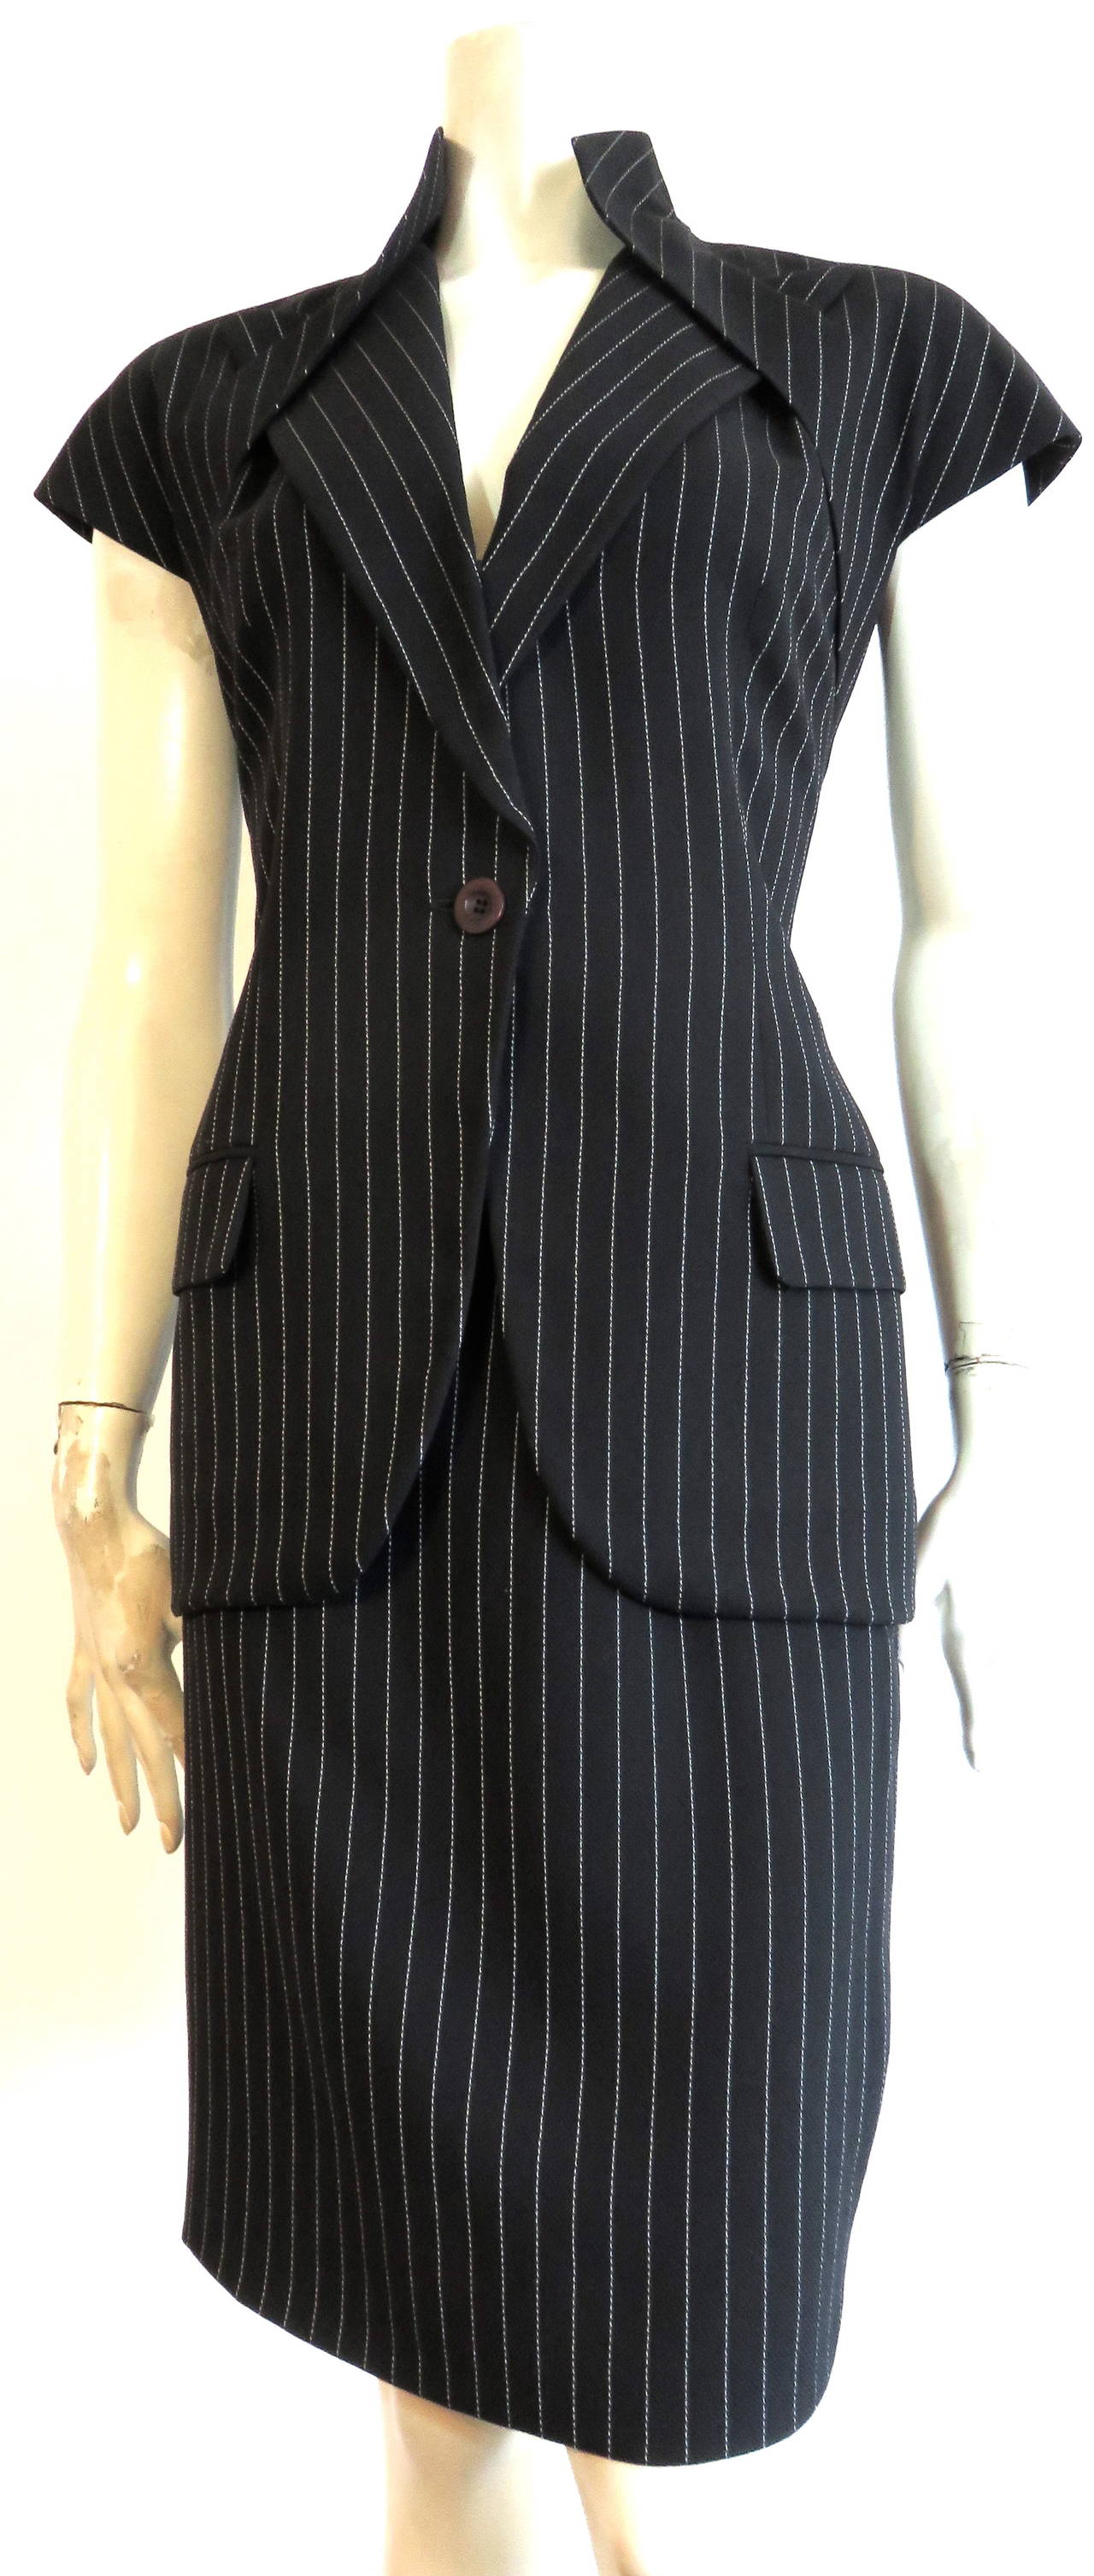 Excellent condition, 1998 GIVENCHY COUTURE by ALEXANDER McQUEEN, pinstripe skirt suit featuring sharp, peak lapel detail.

The jacket of the is incredibly tailored suit, features Alexander McQueen's signature, peak lapel detail which is inserted